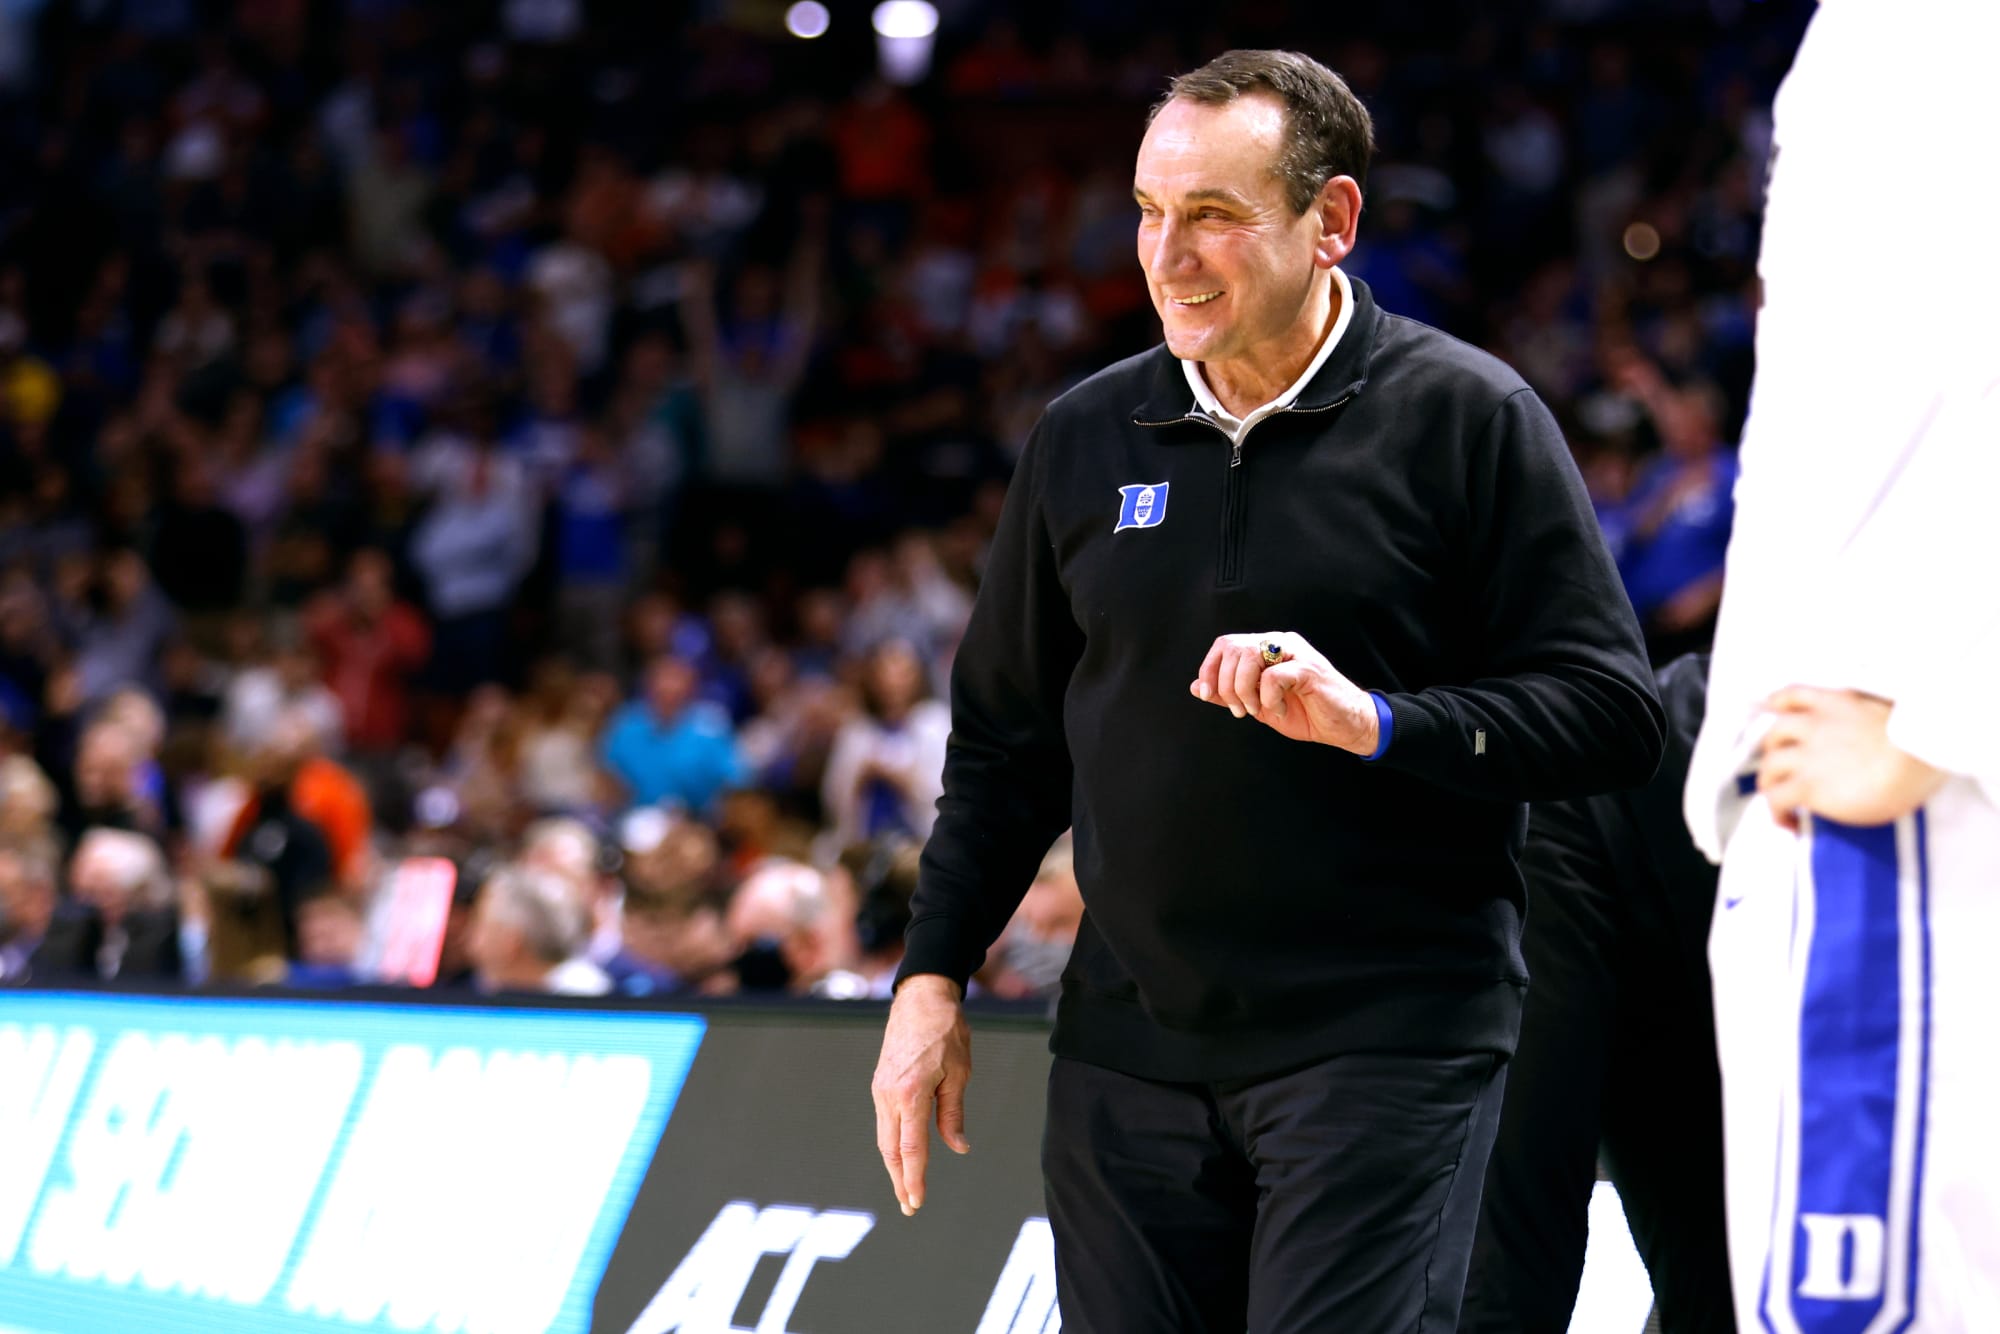 Coach K net worth: Duke coach head into retirement with small fortune